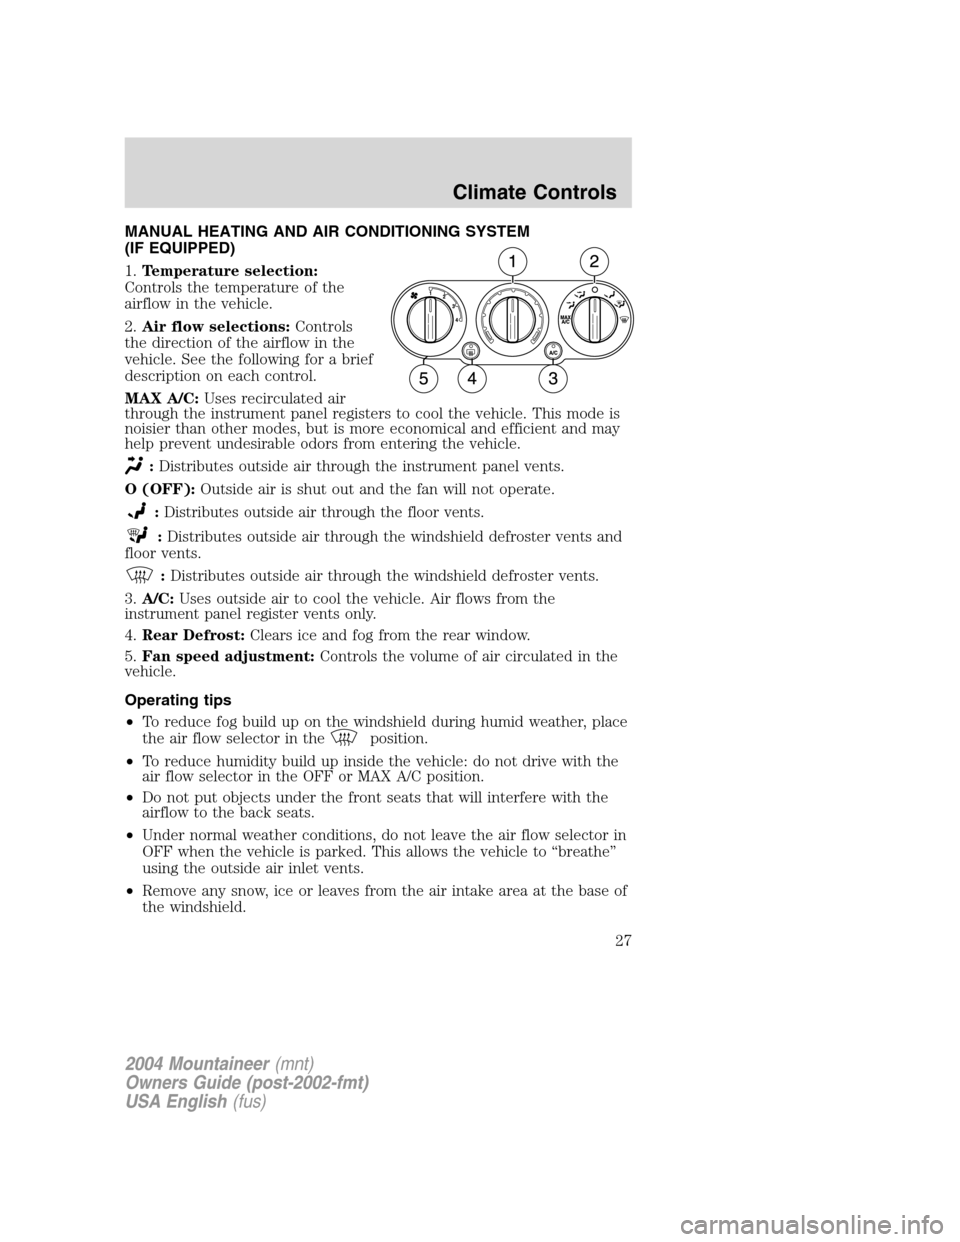 Mercury Mountaineer 2004  s Owners Guide MANUAL HEATING AND AIR CONDITIONING SYSTEM
(IF EQUIPPED)
1.Temperature selection:
Controls the temperature of the
airflow in the vehicle.
2.Air flow selections:Controls
the direction of the airflow in